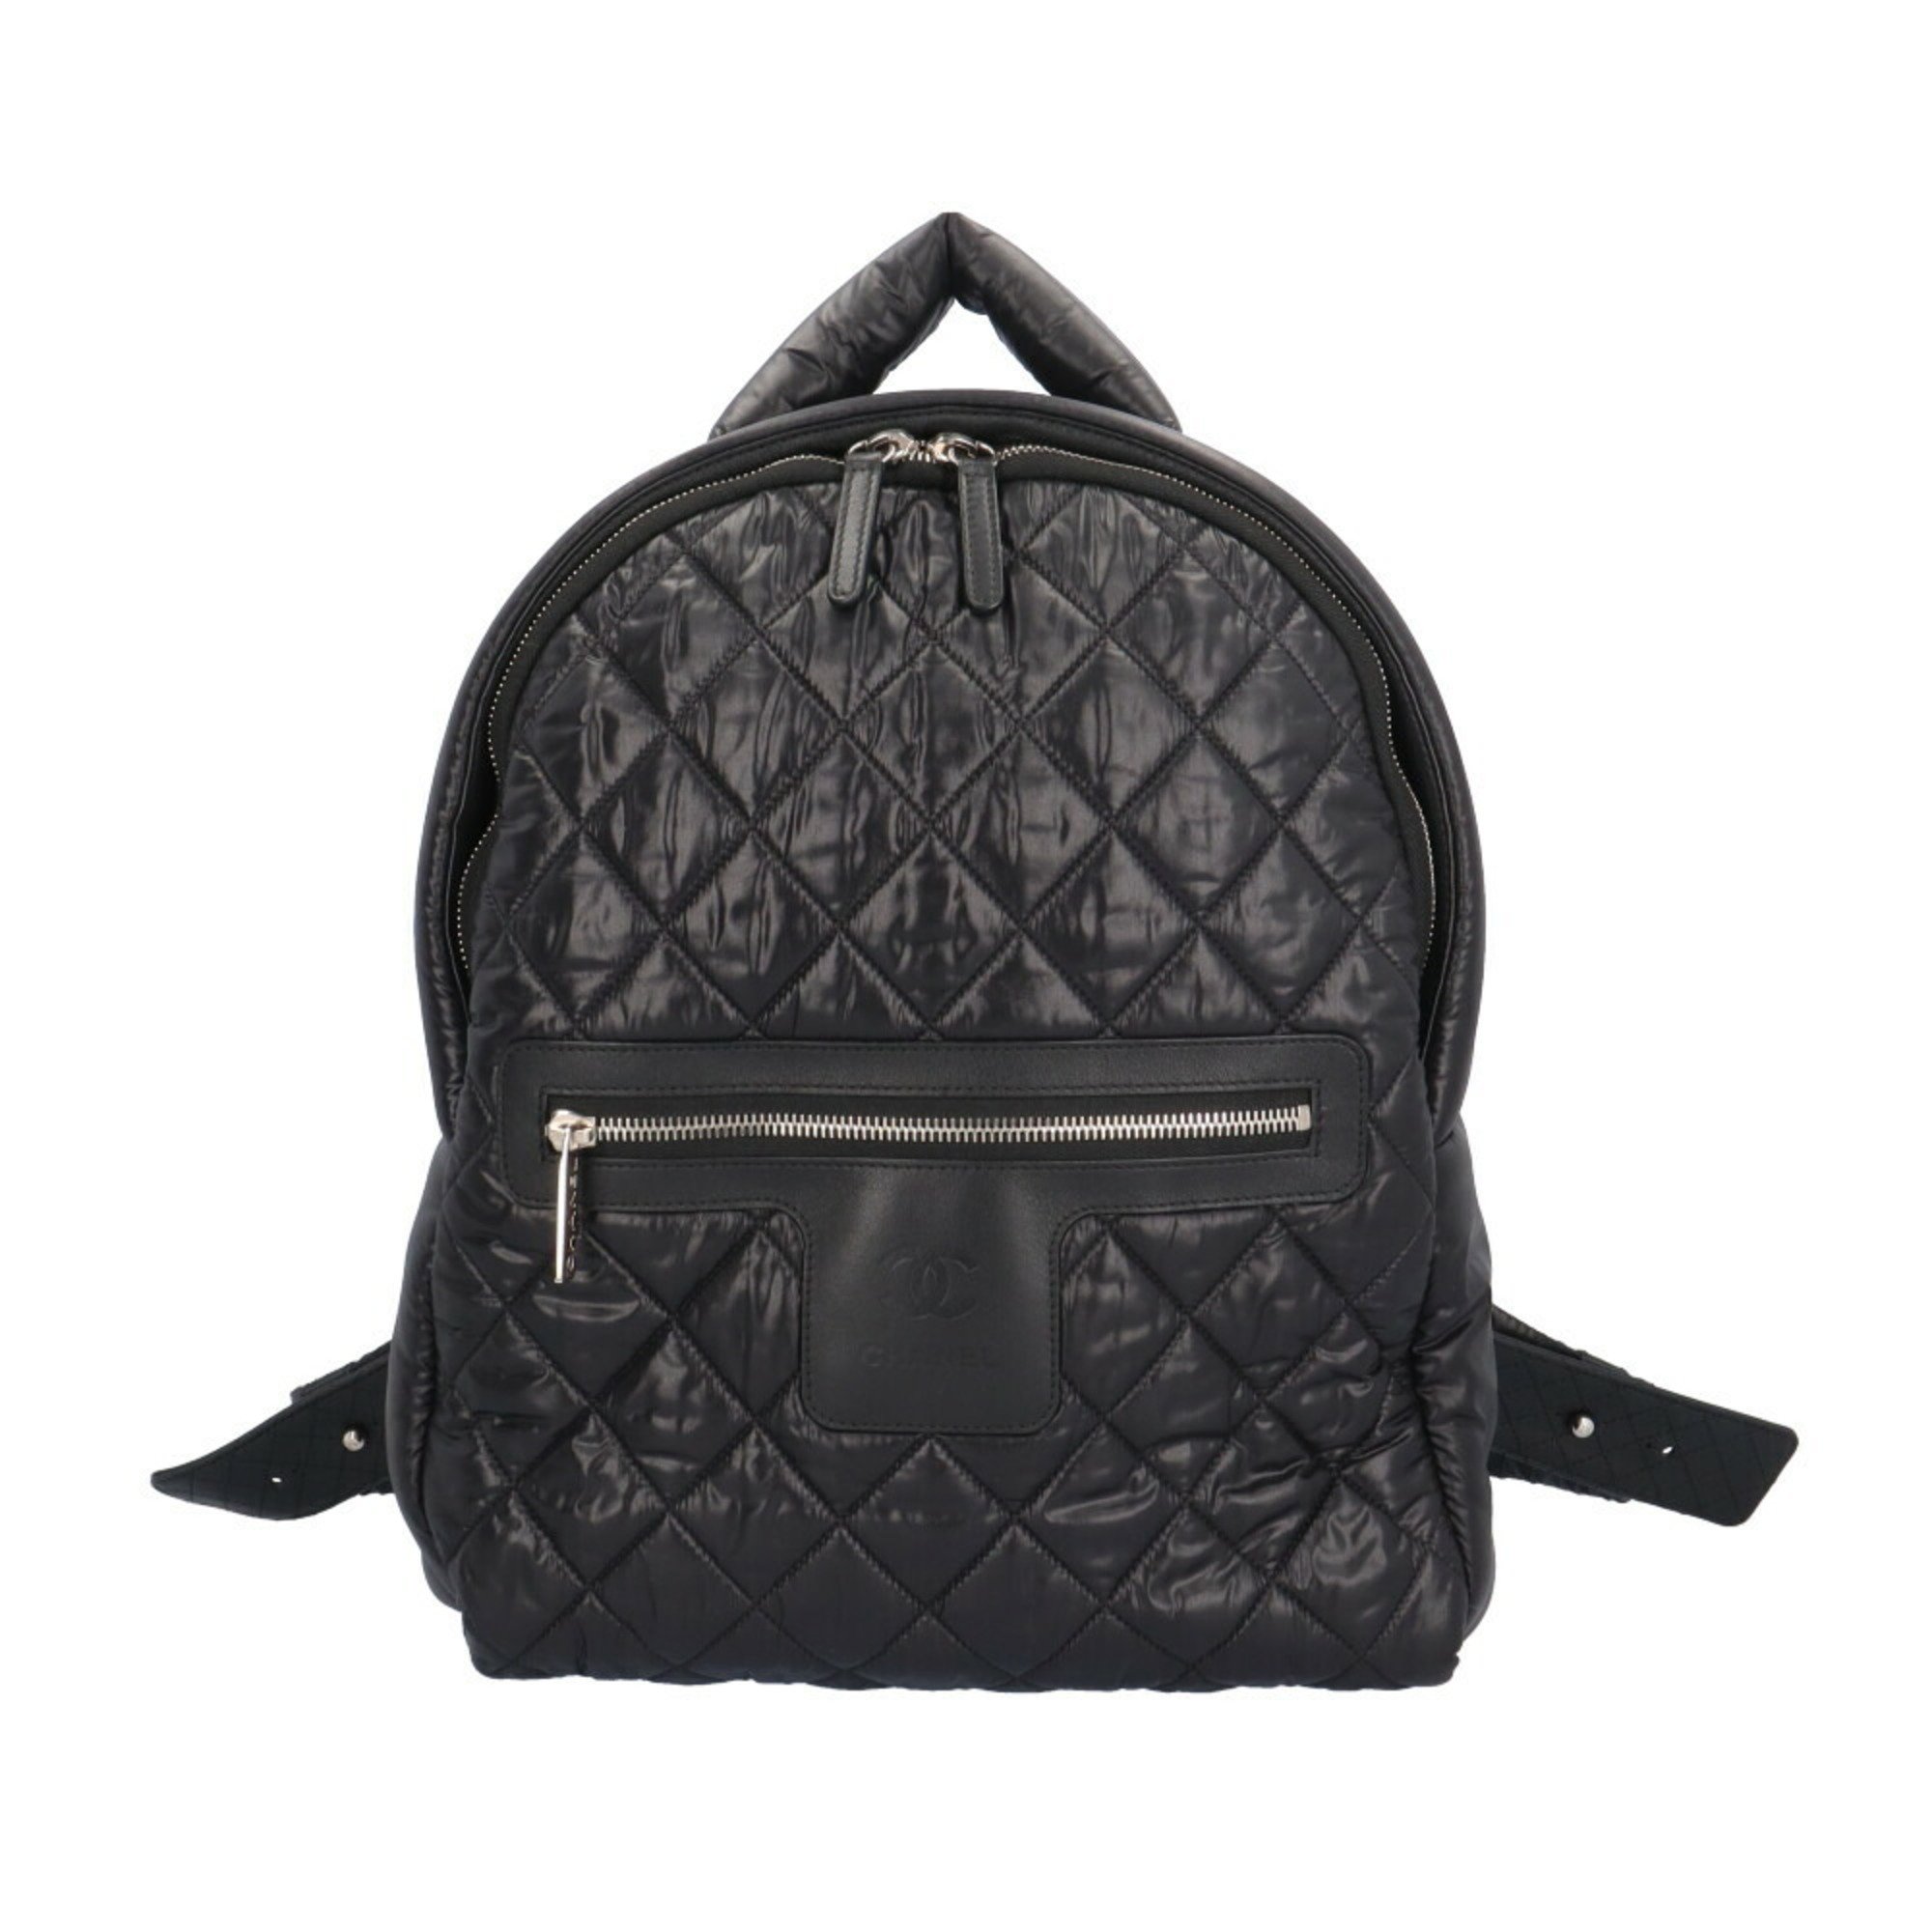 CHANEL Coco Cocoon Backpack/Daypack Chanel Nylon A92559 Women's